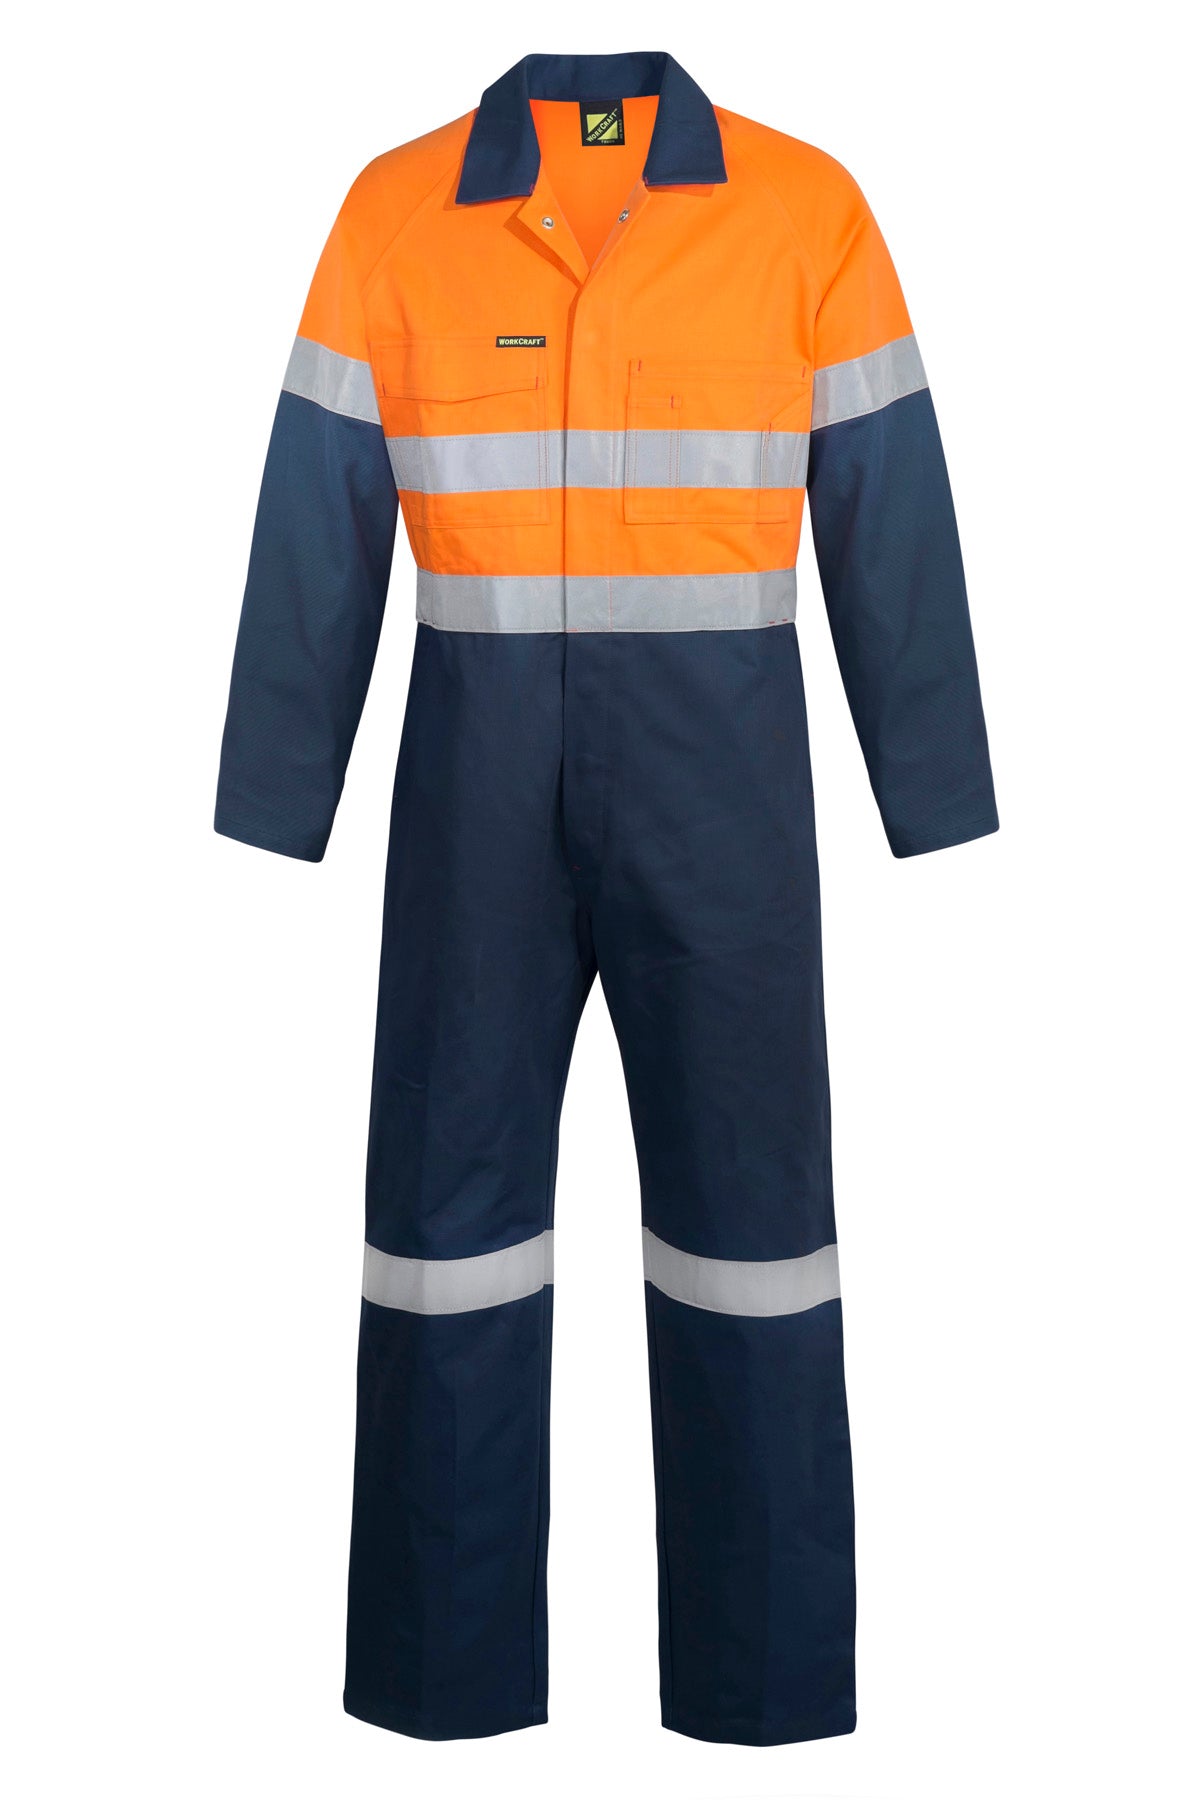 Workcraft WC6093 Hi-vis Two Tone Cotton Drill Coveralls With CSR Reflective Tape